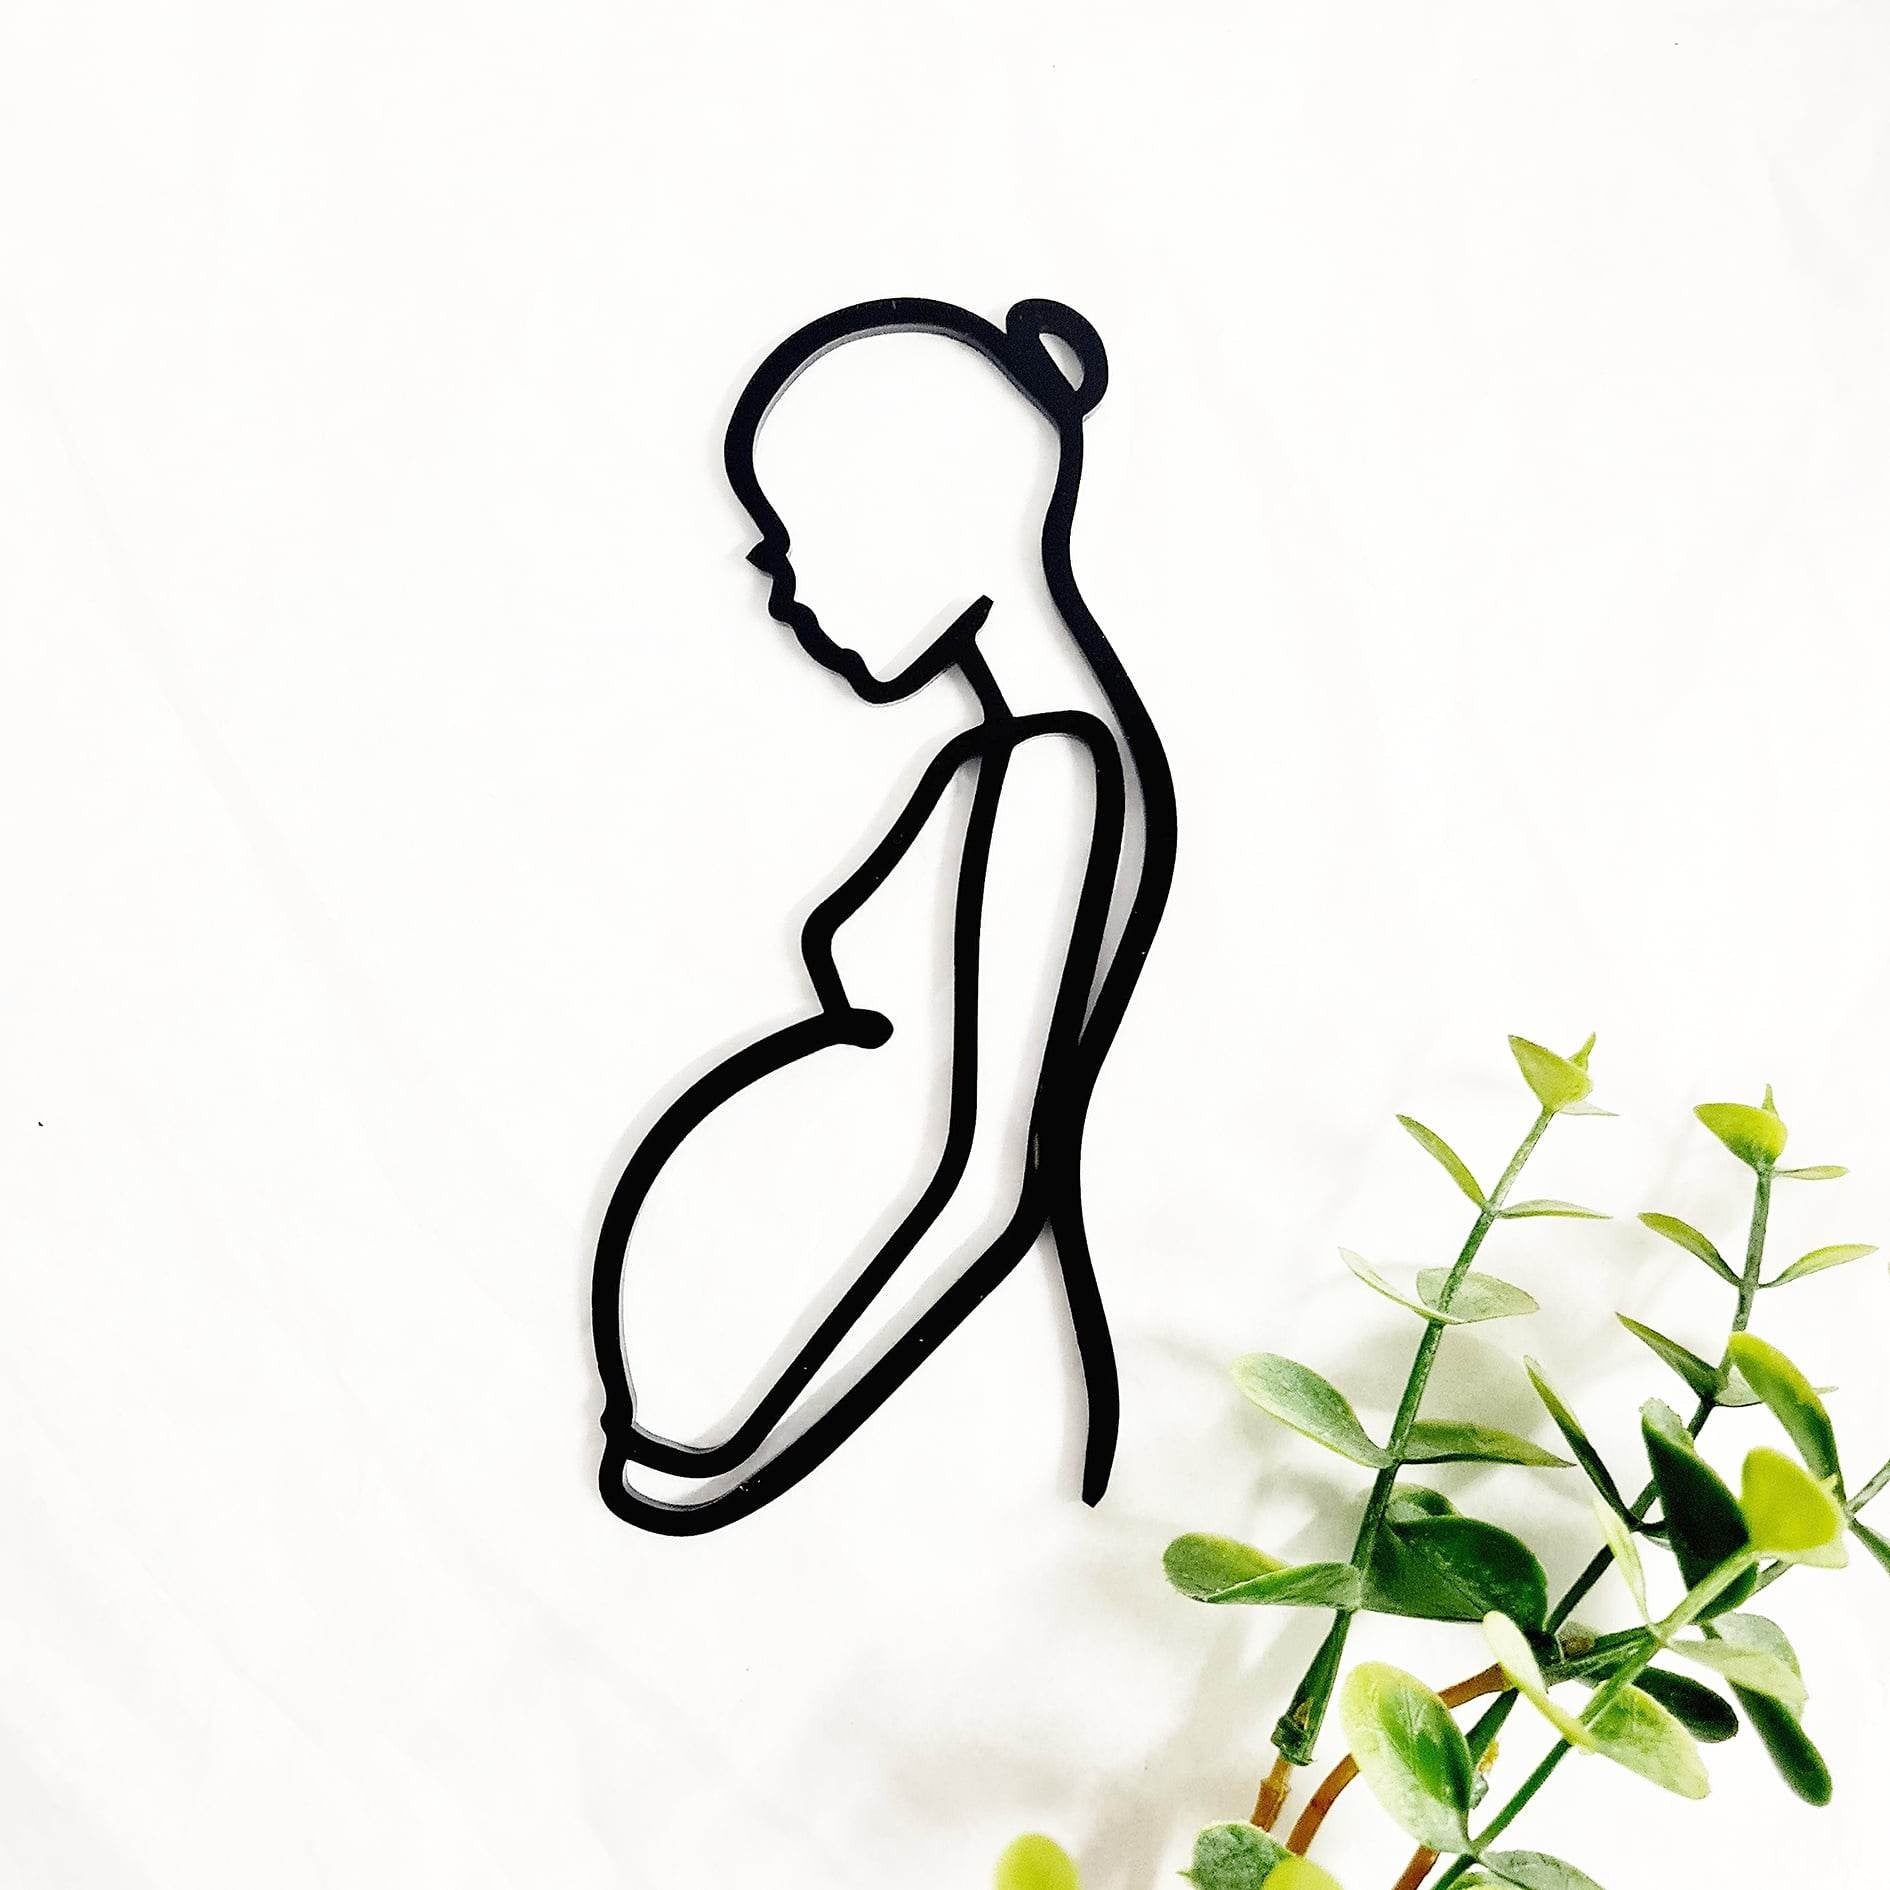 pregnant woman silhouette outline